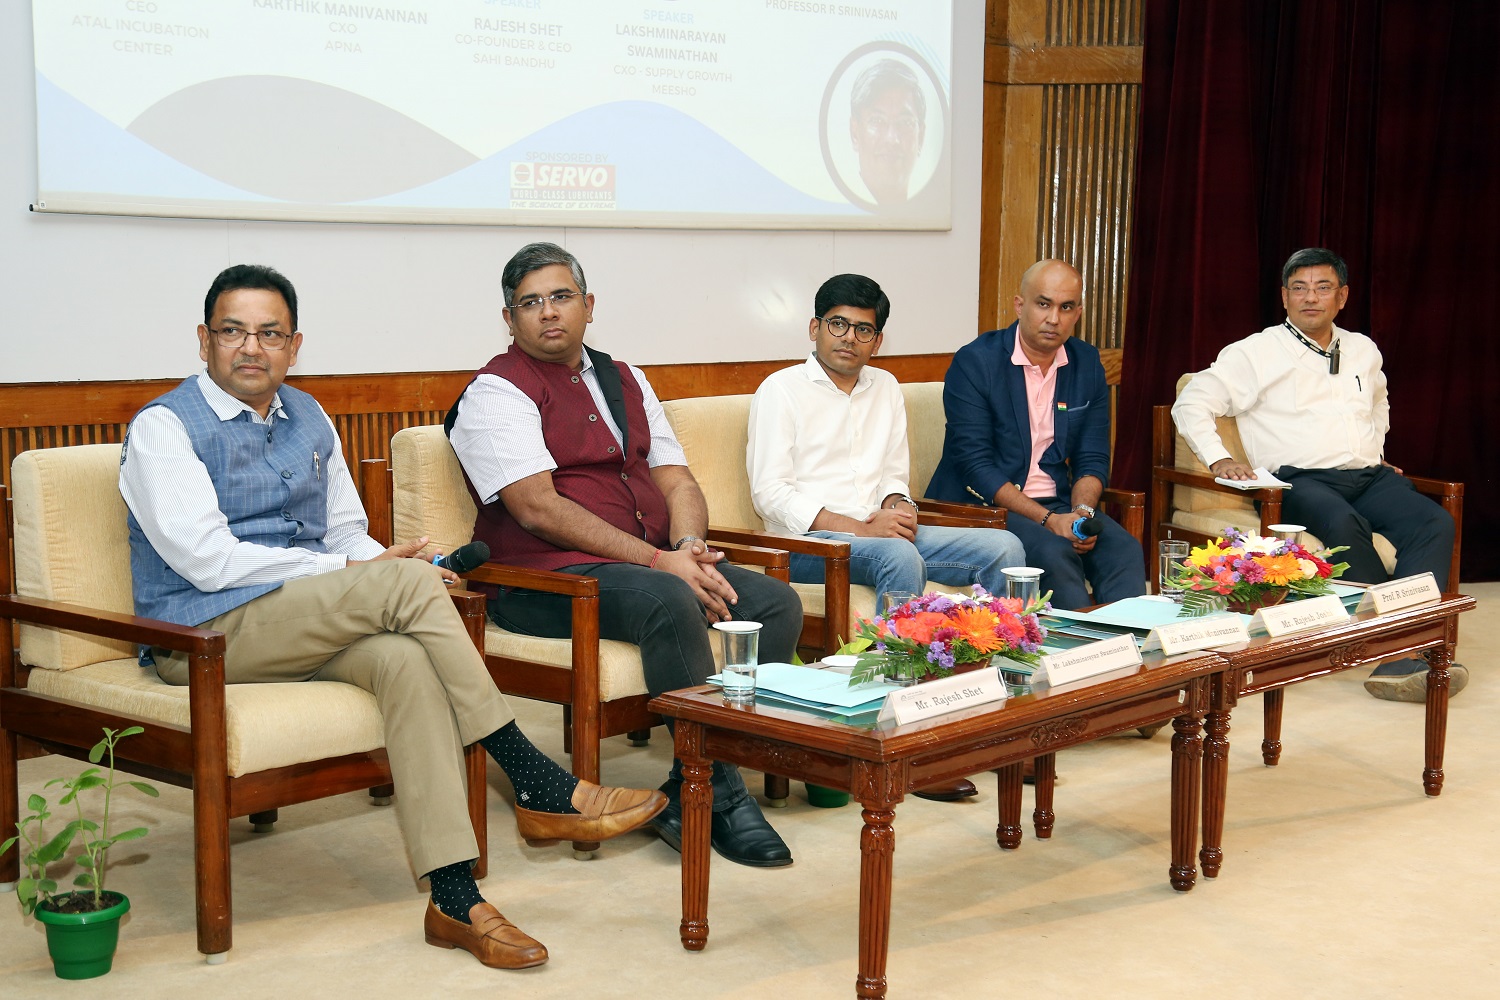 Rajesh Shet, CEO & Co-Founder, SahiBandhu, Lakshminarayan Swaminathan, CXO, Supply Growth, Meesho, Karthik Manivannan, CXO, apna, Rajesh Joshi, CEO, Atal Incubation Centre, and Professor R Srinivasan, faculty in the Strategy area and author of the book, ‘Platform Business Models’, at the panel discussion on ‘New Age Business Models’.